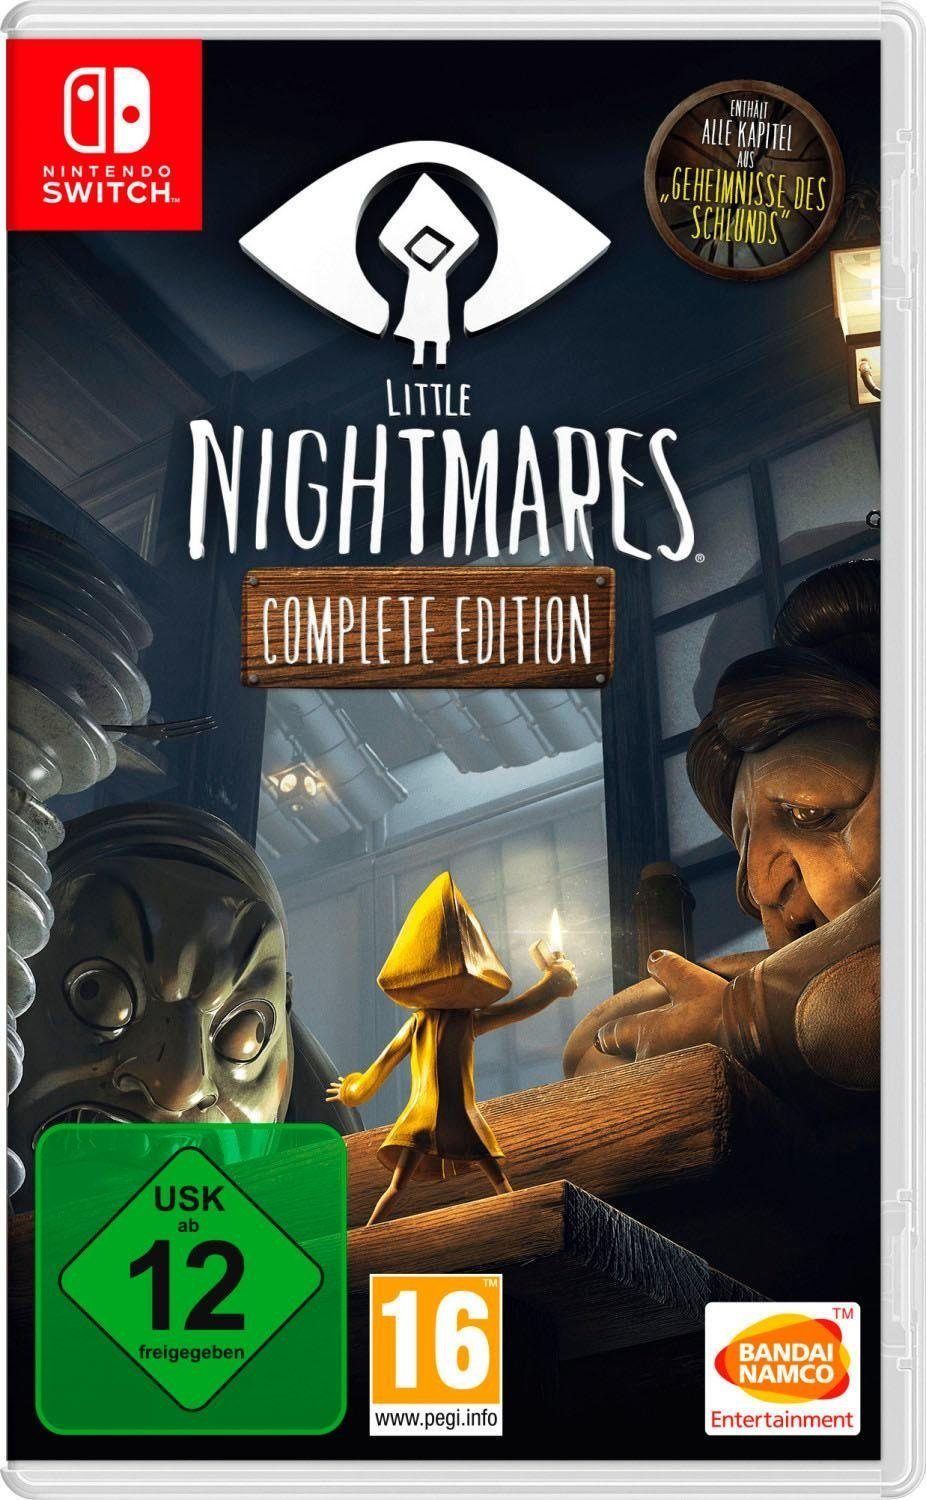 BANDAI NAMCO LITTLE NIGHTMARES COMPLETE EDITION Nintendo Switch, Software Pyramide